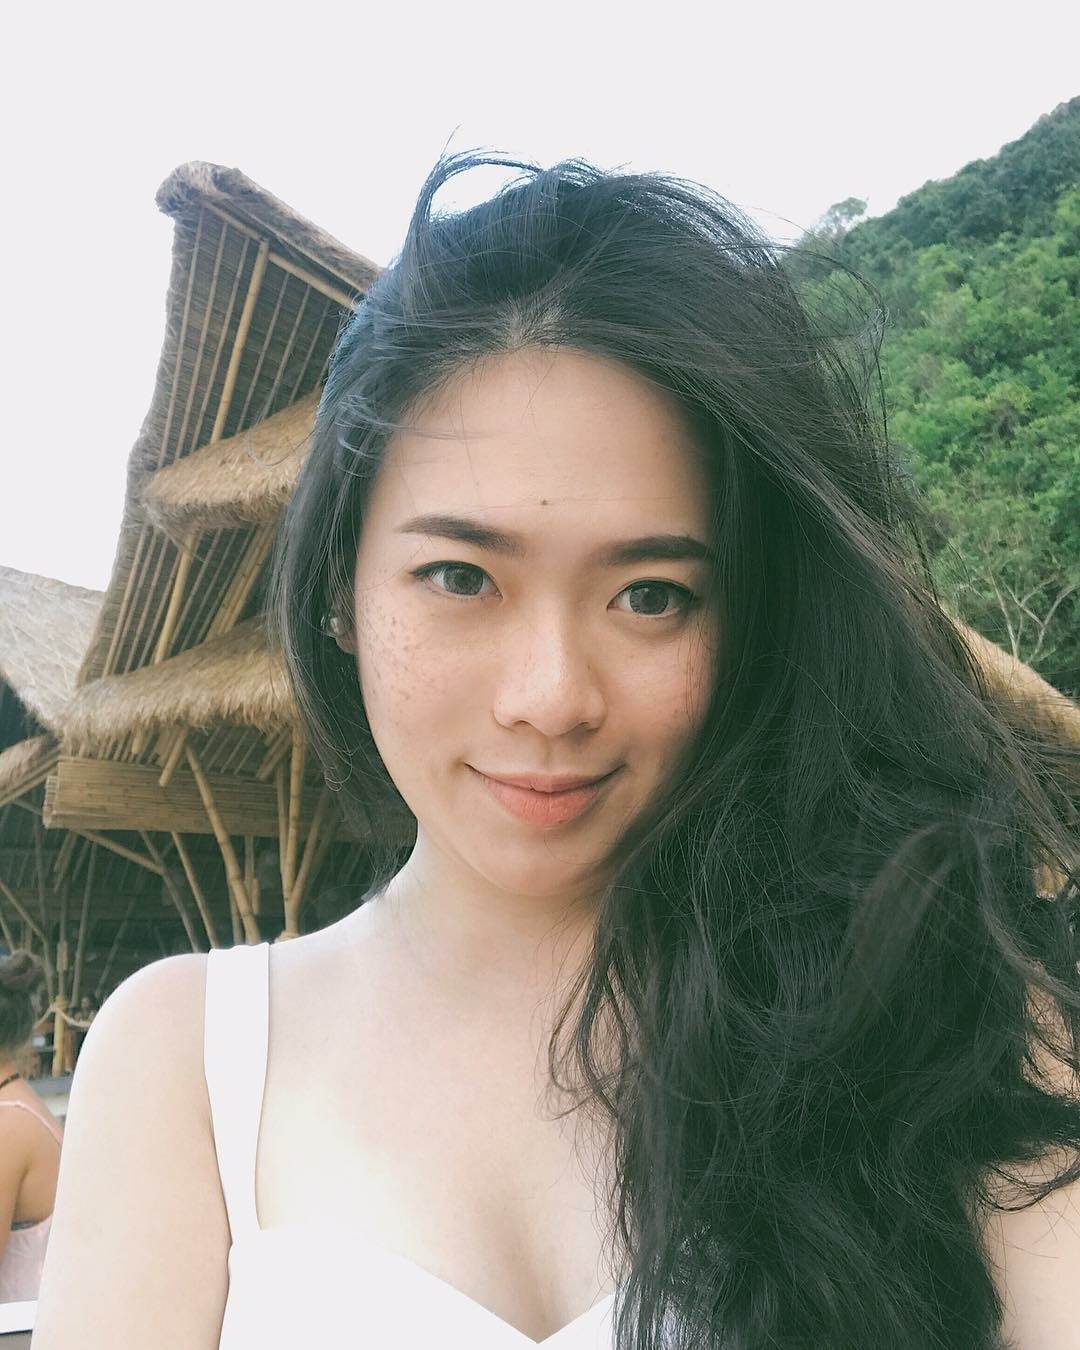 Id Sg Girls — Pretty Face Nice Body For Me The Freckles Make